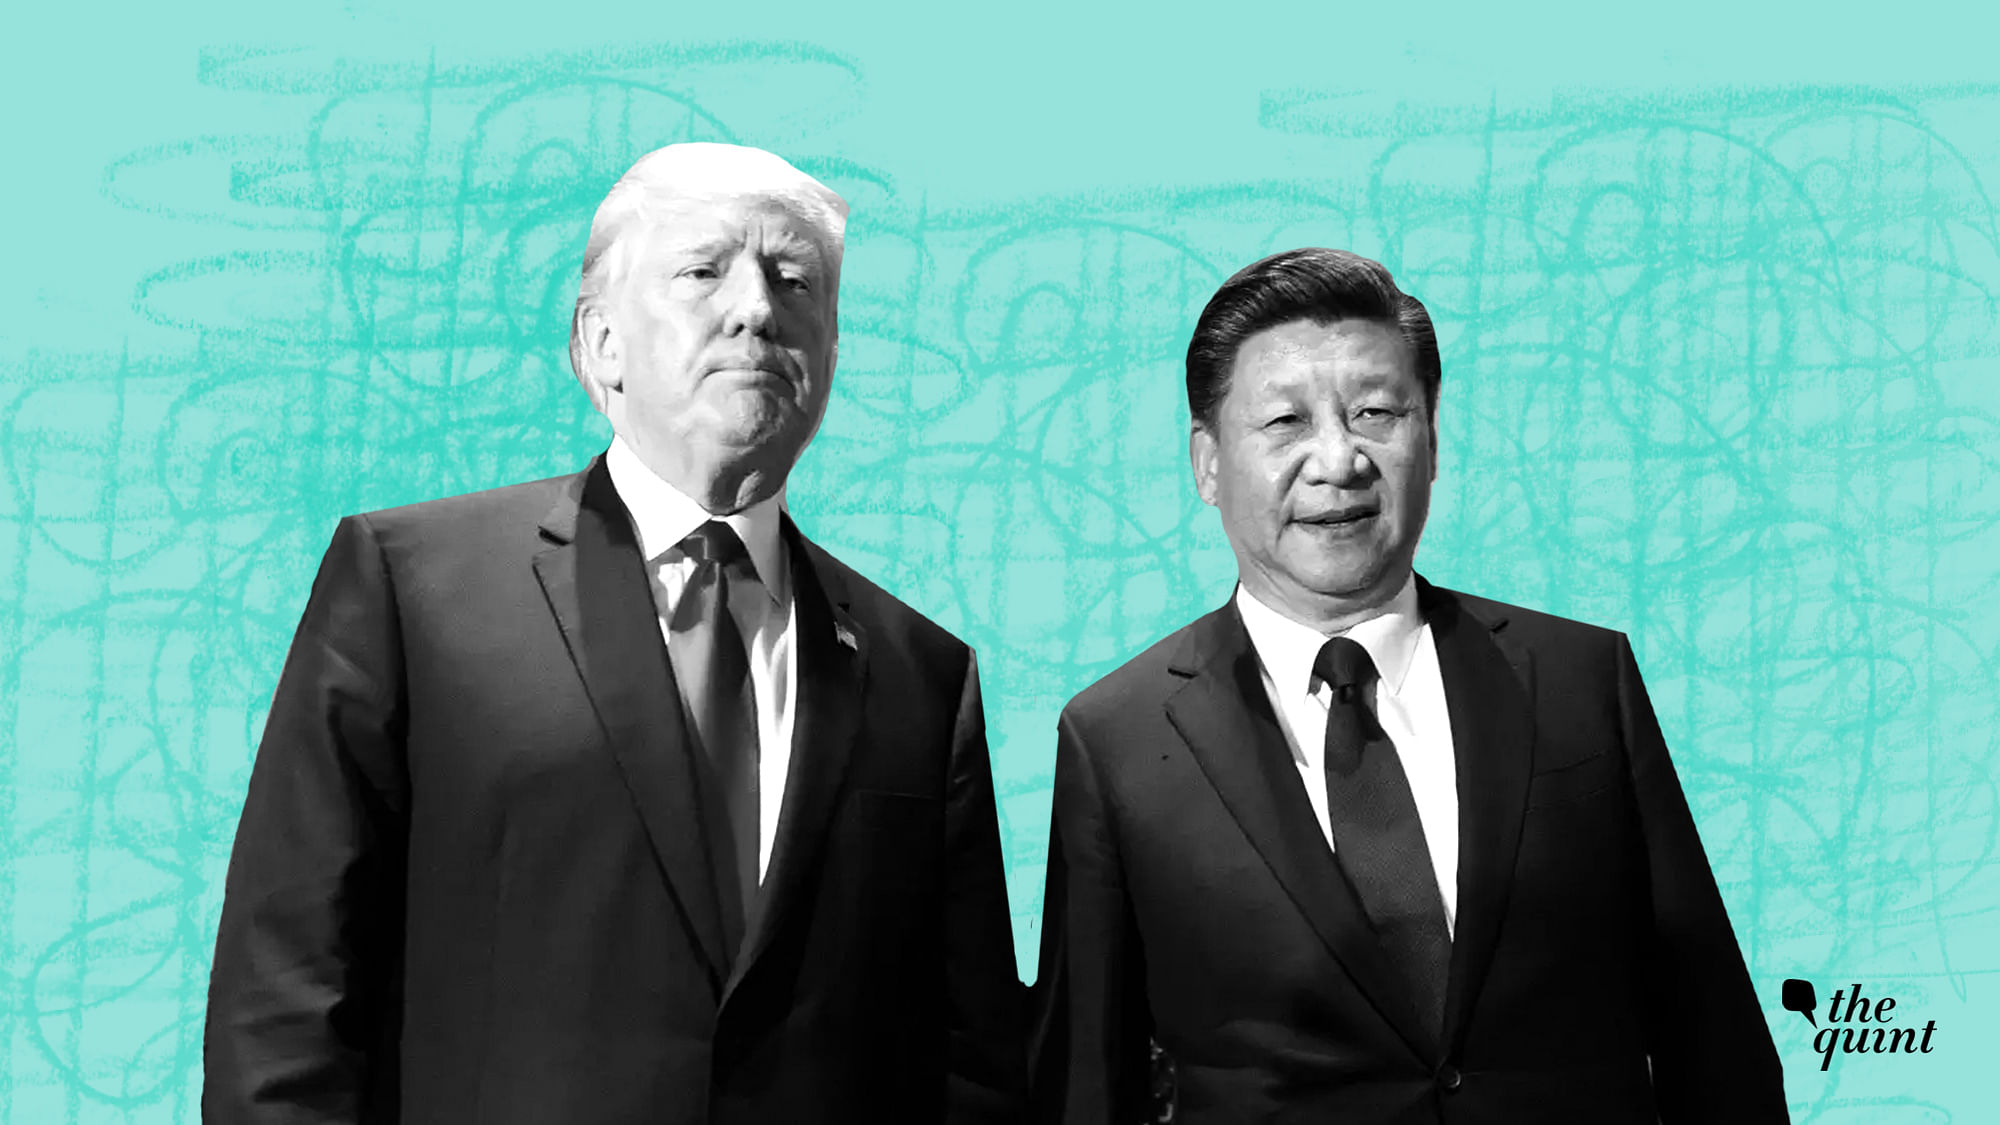 (From left to right) US President Donald Trump and Chinese President Xi Jinping. Image used for representation.